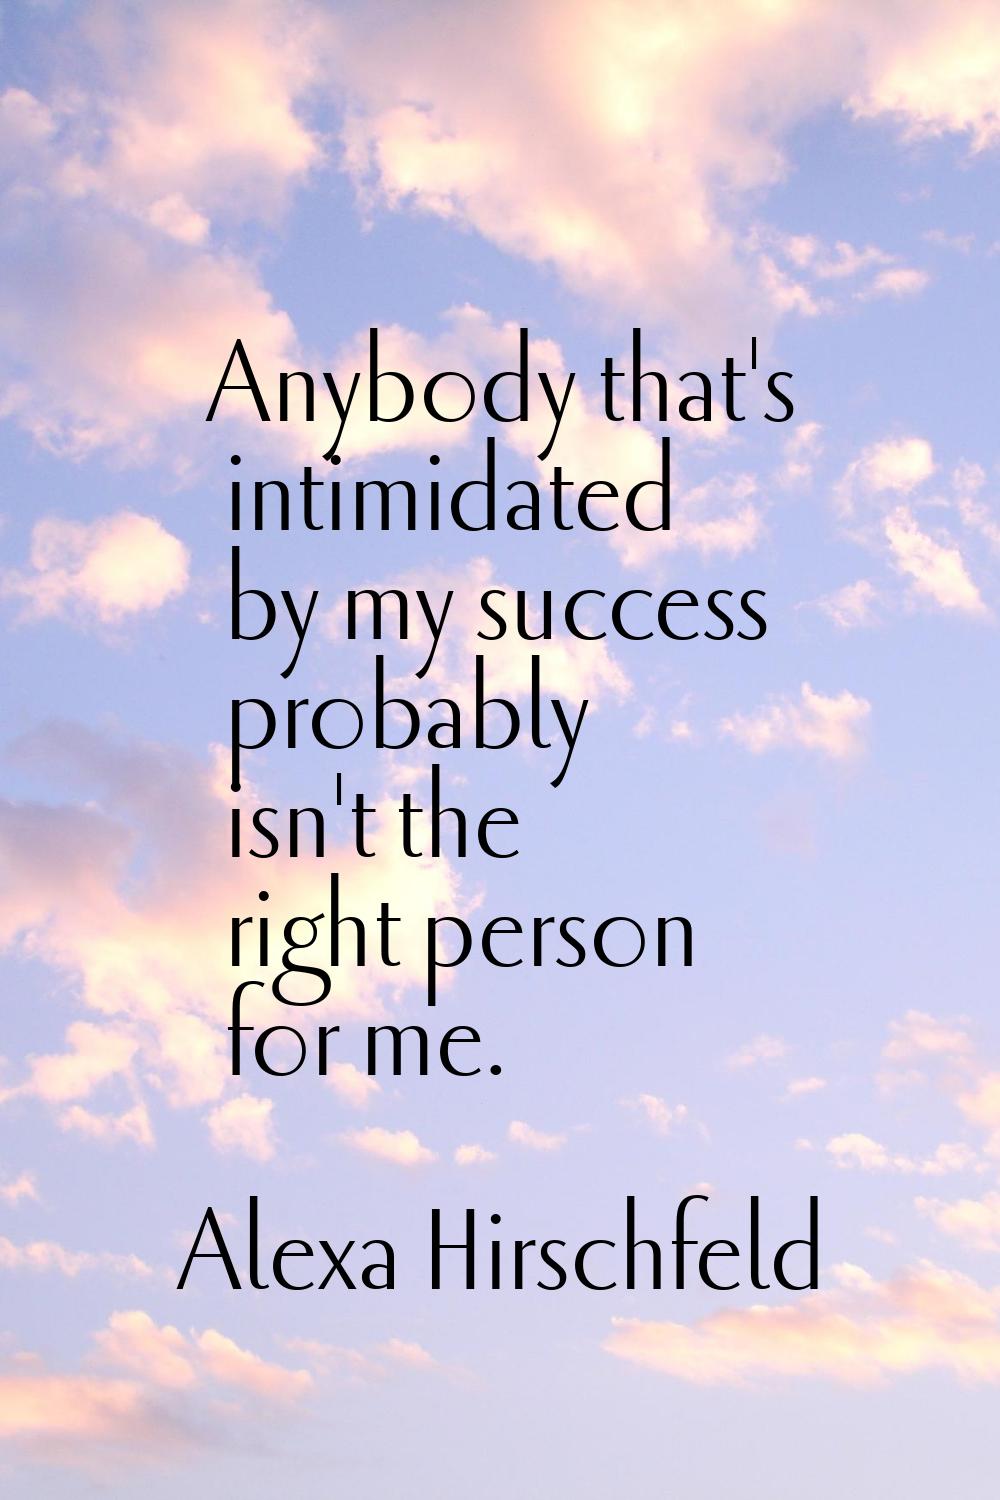 Anybody that's intimidated by my success probably isn't the right person for me.